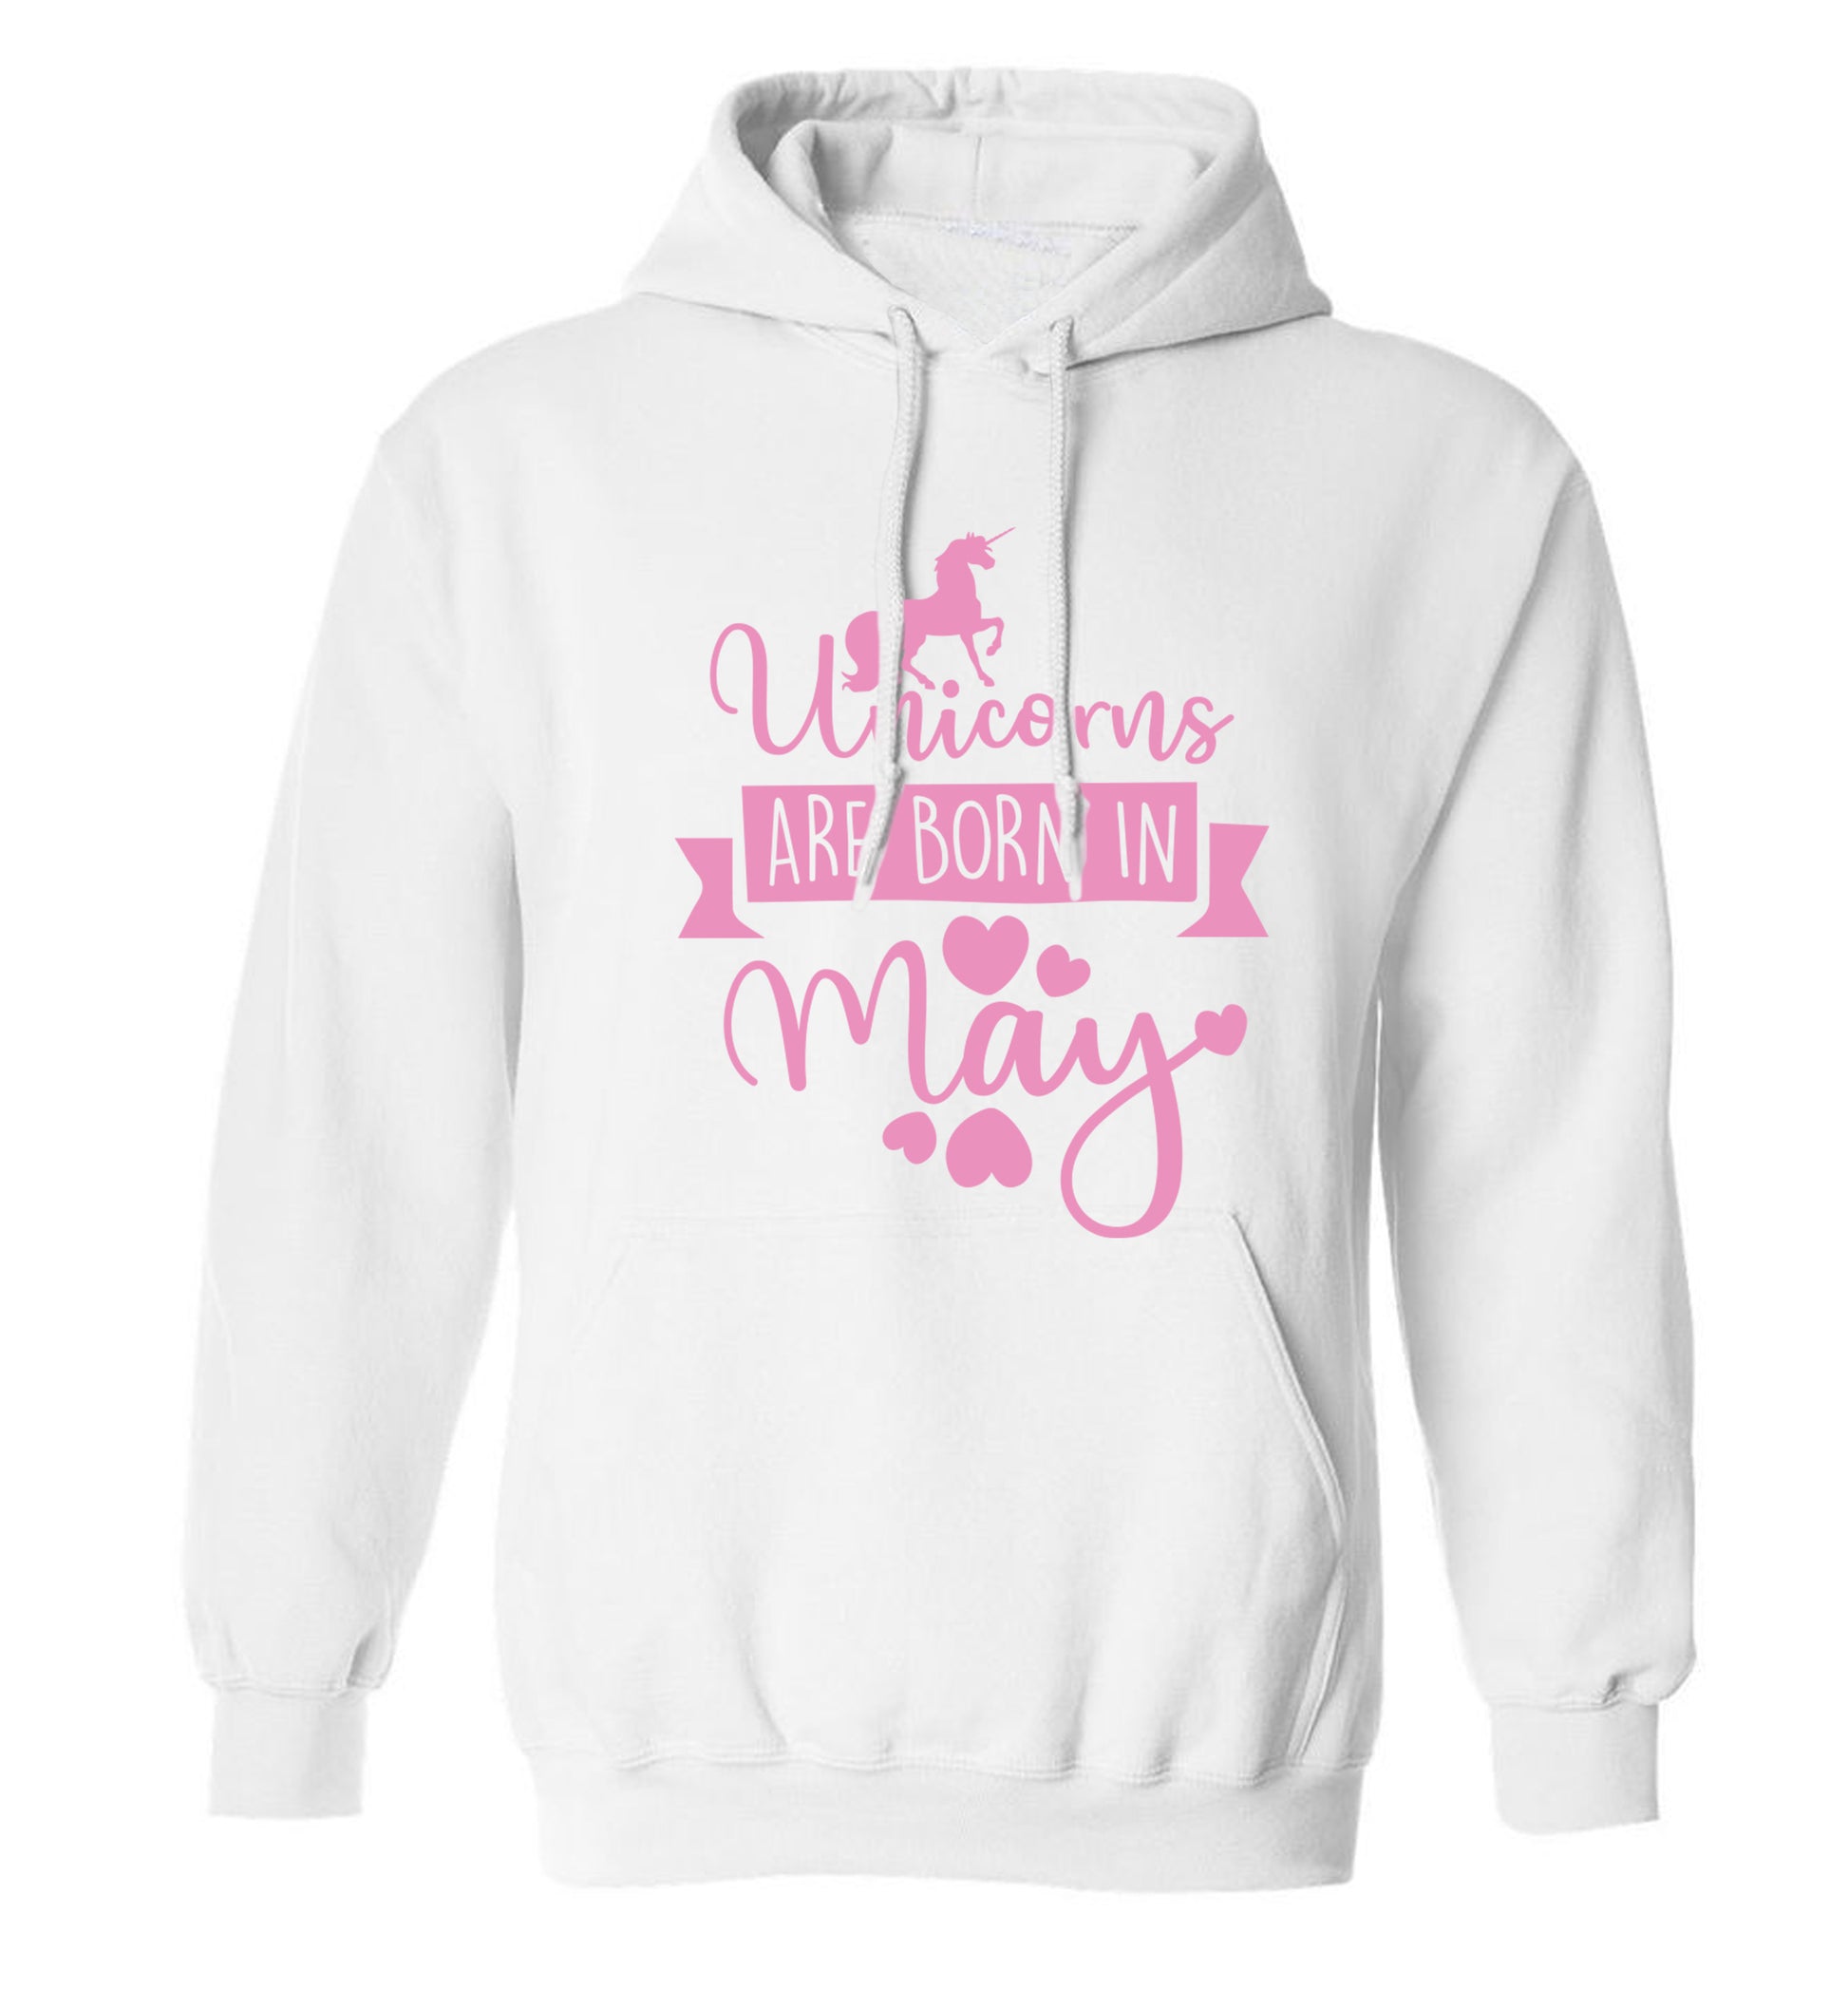 Unicorns are born in May adults unisex white hoodie 2XL